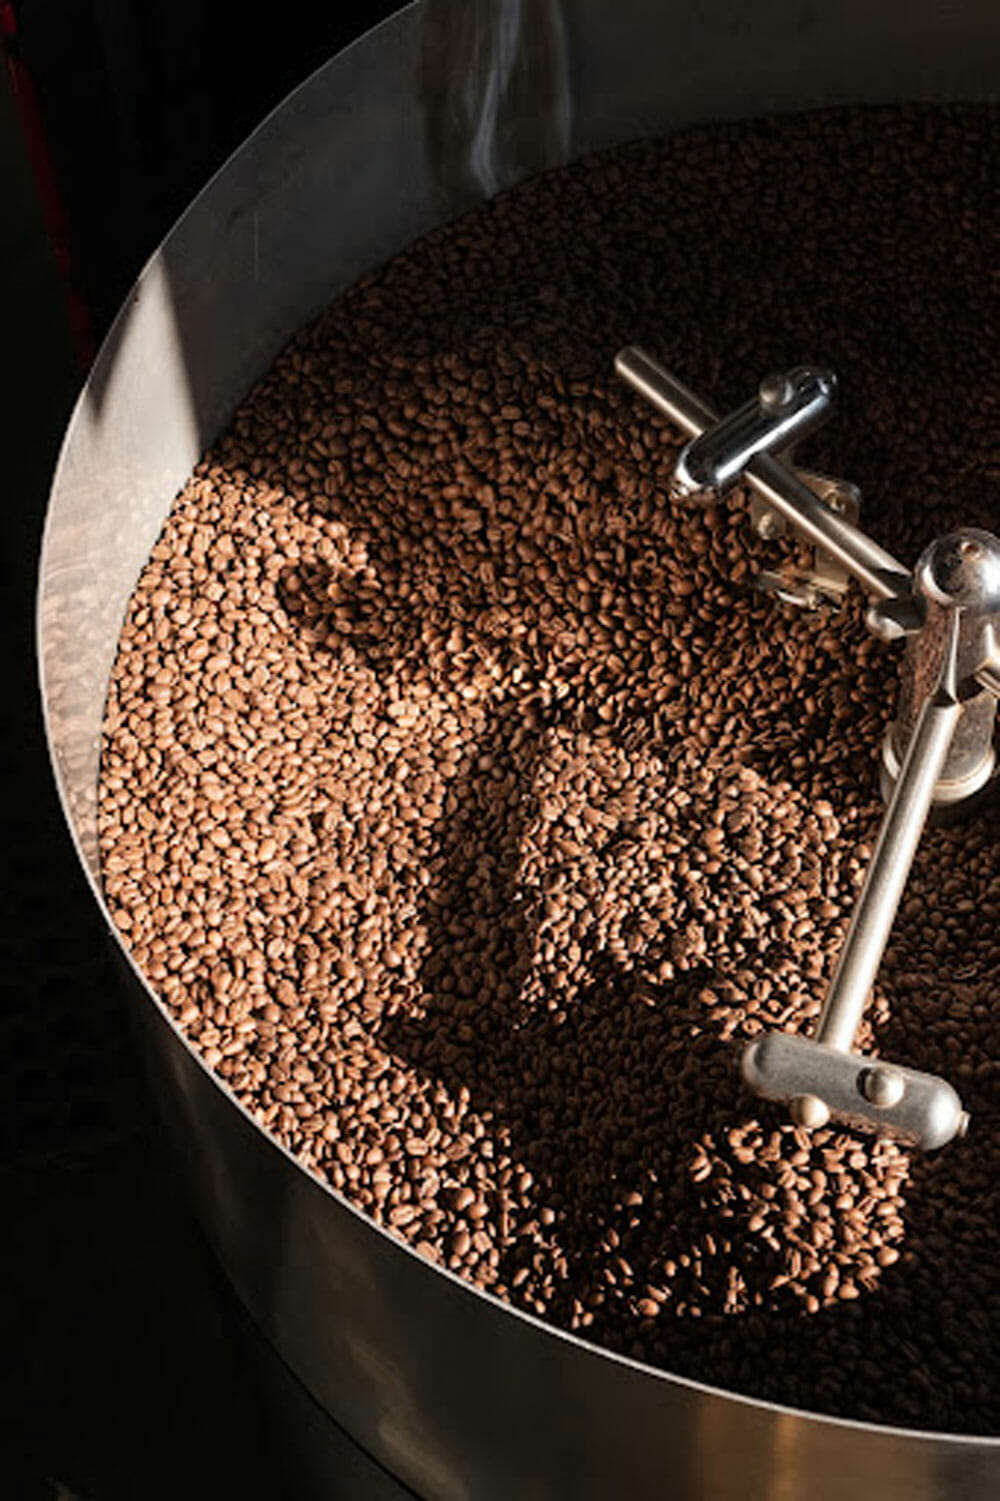 Roasted coffee beans in the cooling tray of a roaster.